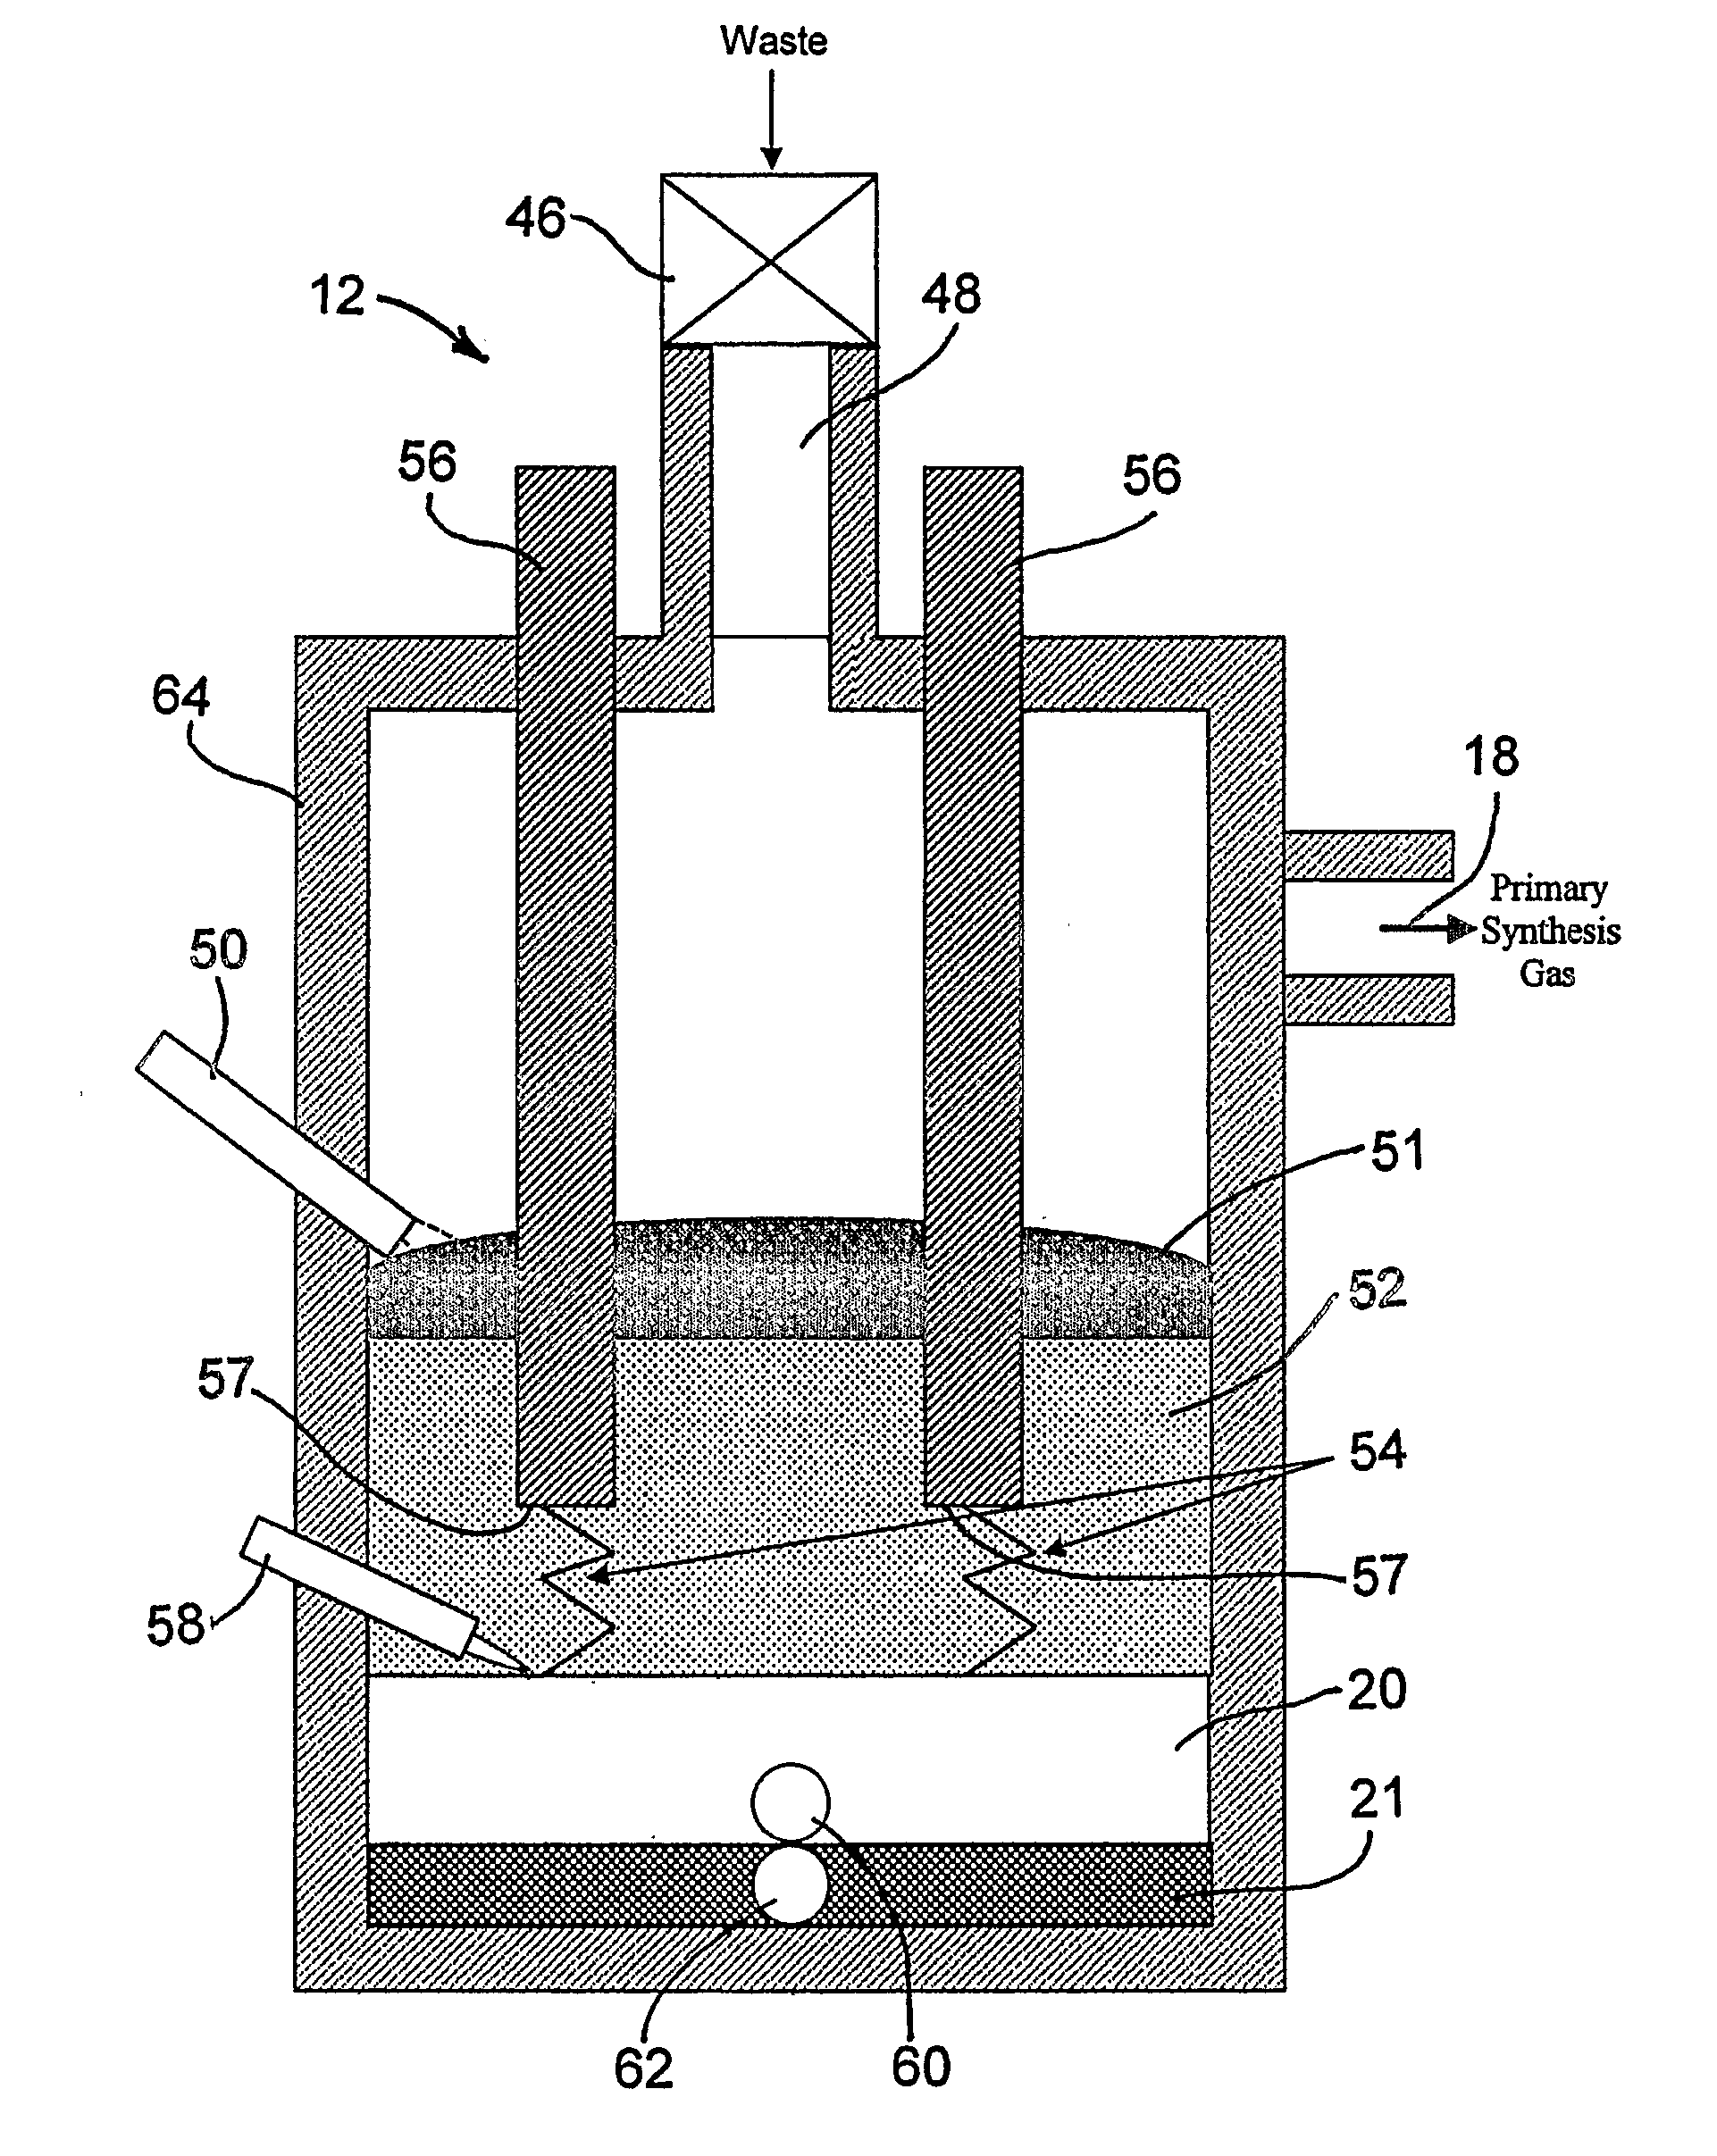 Two-stage plasma process for converting waste into fuel gas and apparatus therefor